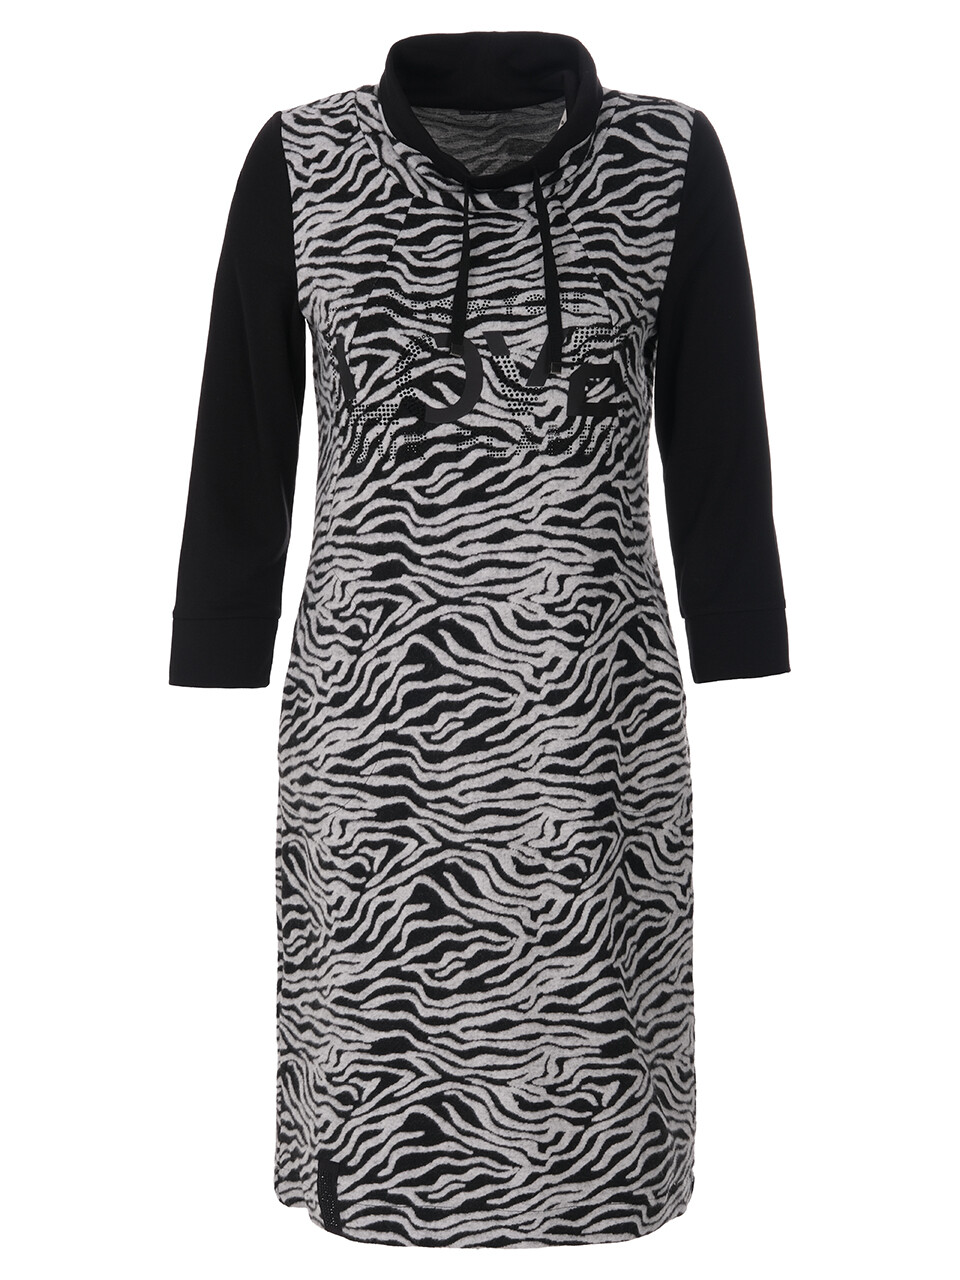 Dolcezza: Show Your Wild Comfy Dress